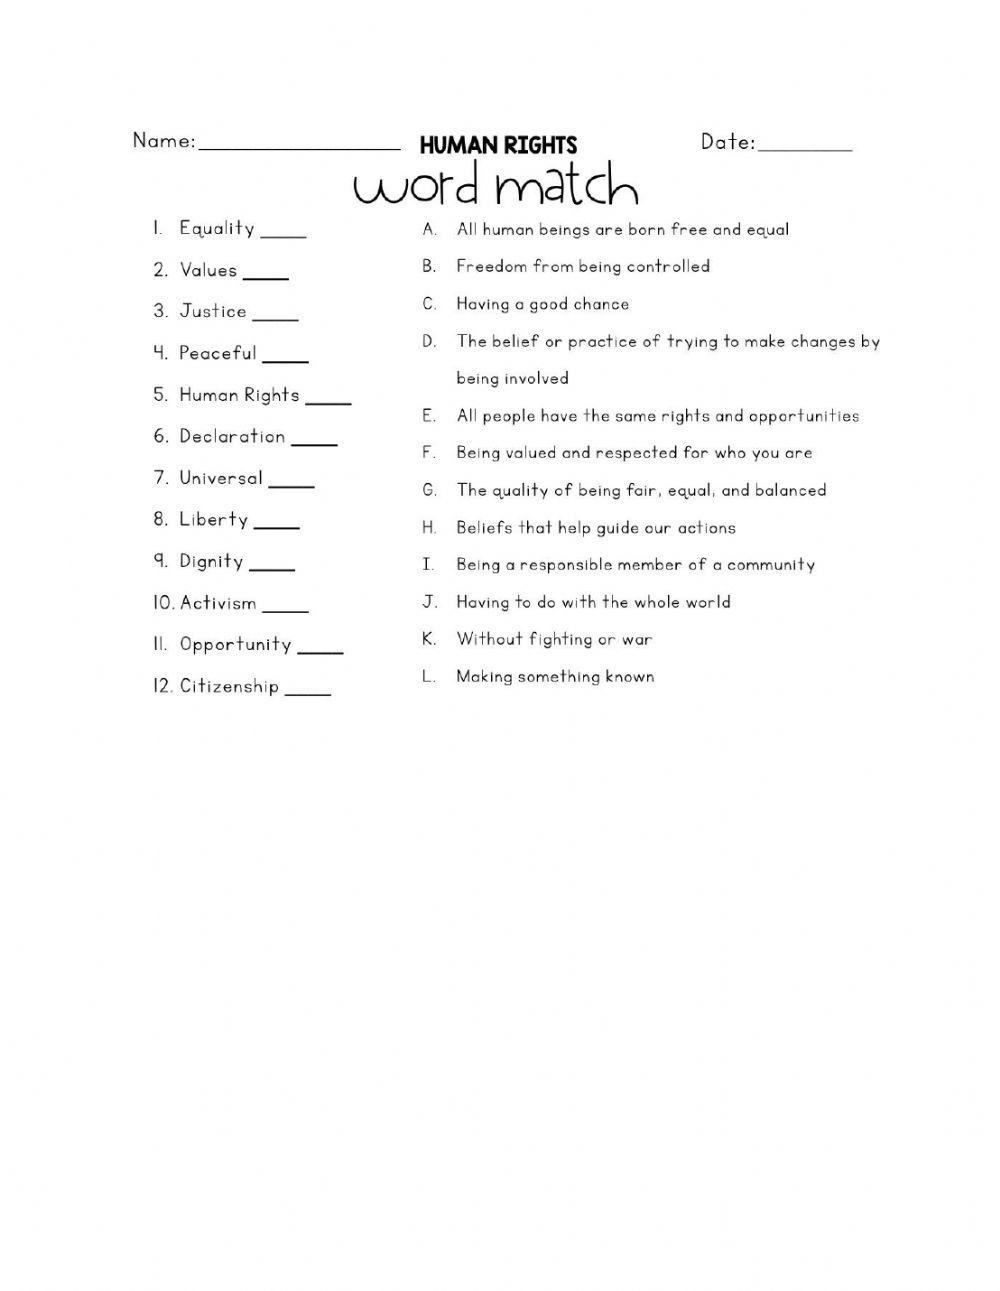 Human Rights- Word Match